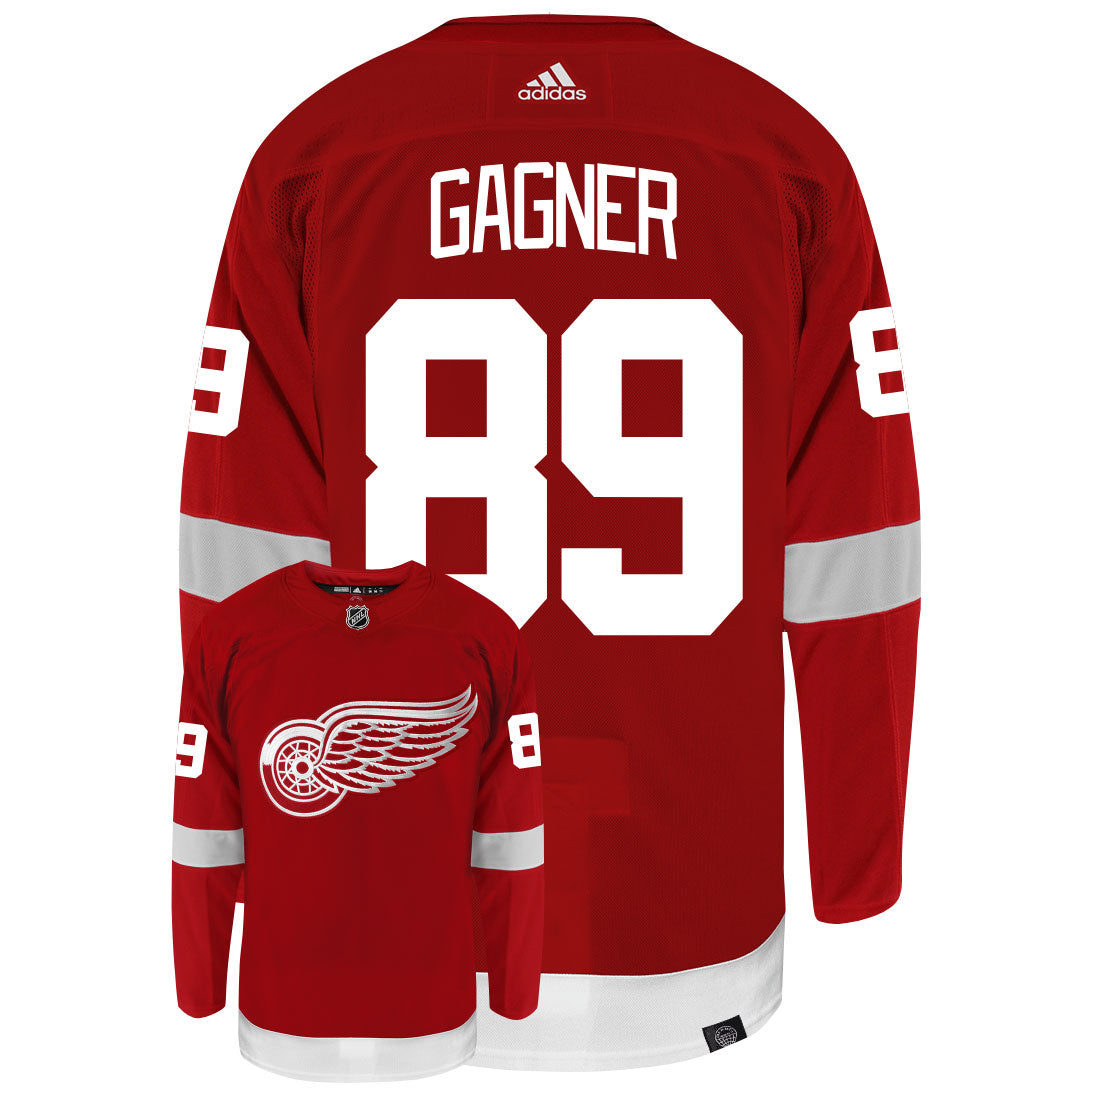 Sam Gagner Detroit Red Wings Adidas Primegreen Authentic NHL Hockey Jersey